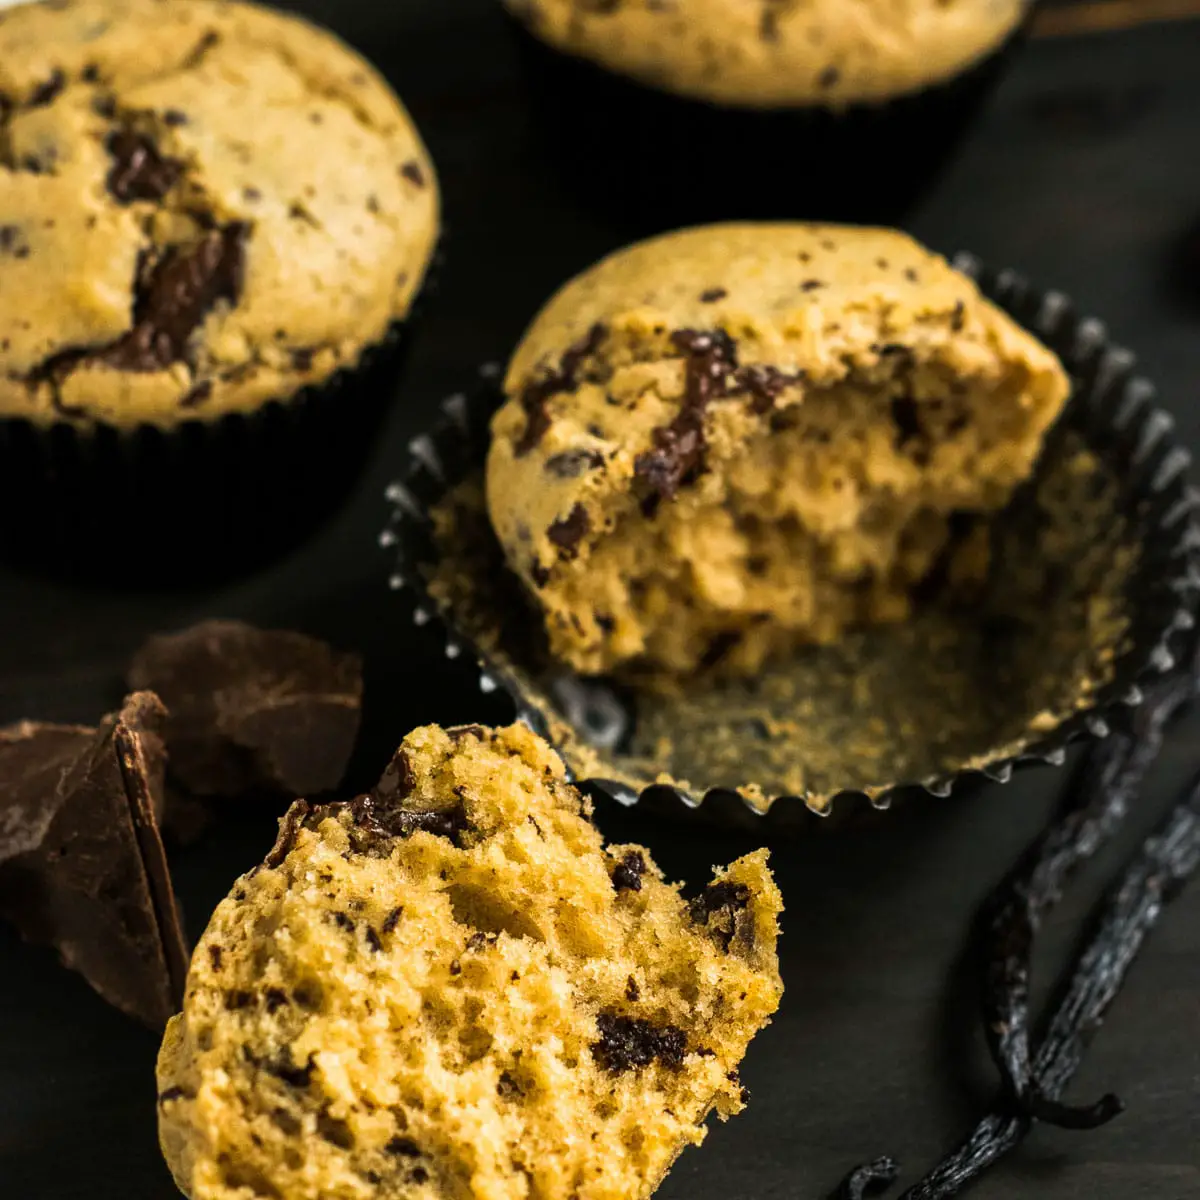 Chocolate Chunk Muffins cut in half showing inside of muffin full of chocolate pieces.